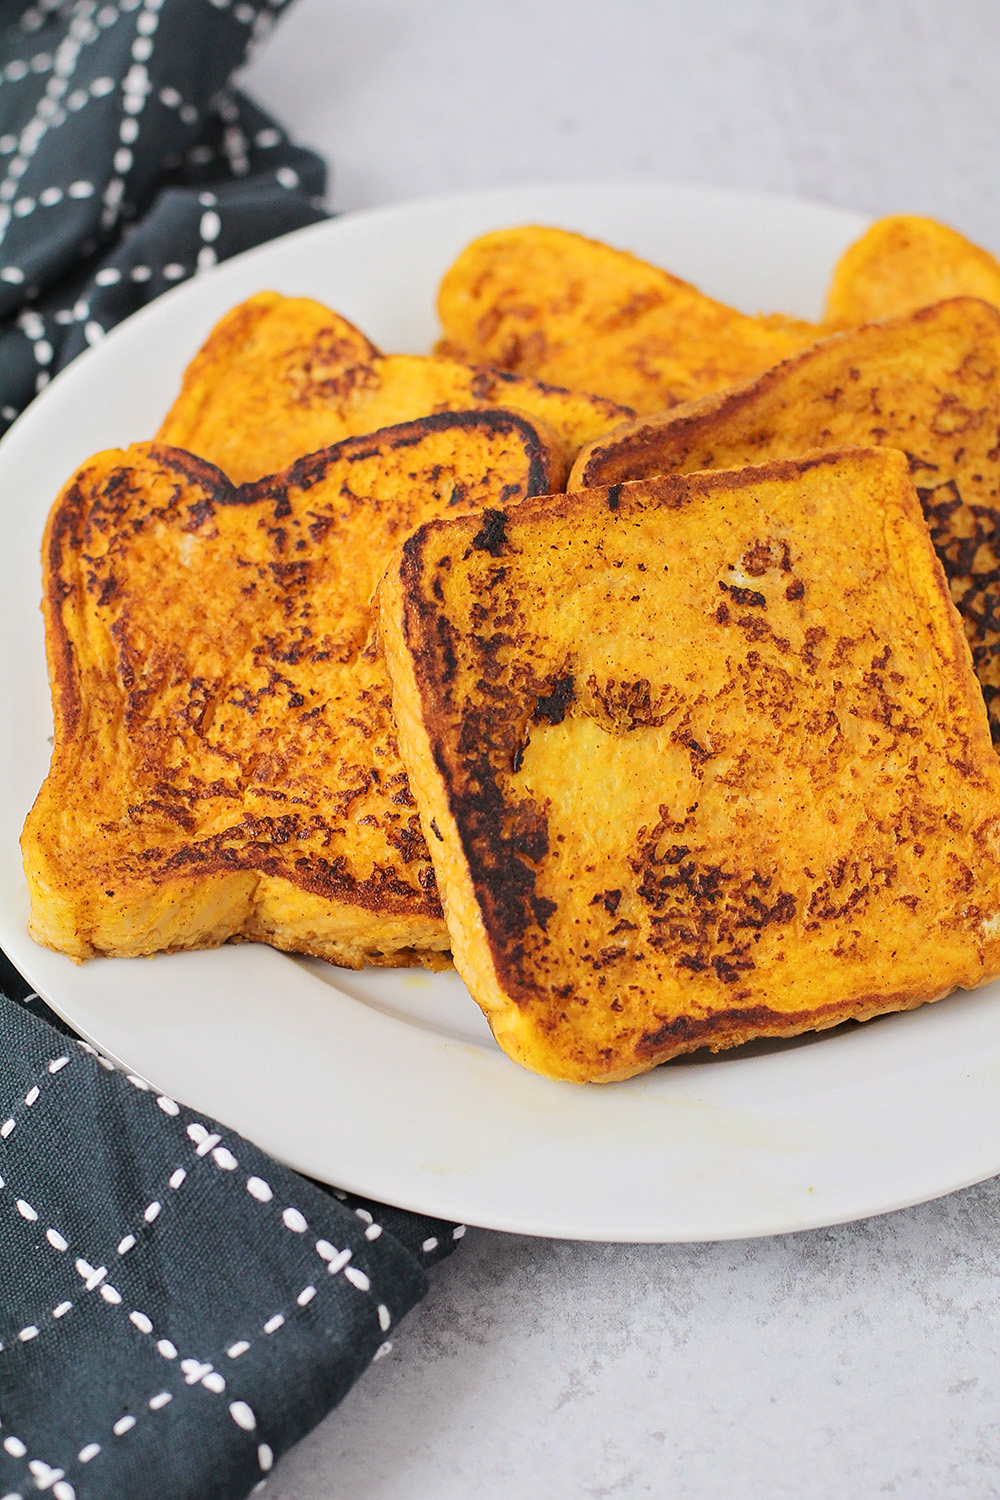 This pumpkin french toast is super easy to make, and incredibly delicious. It's the perfect fall breakfast!